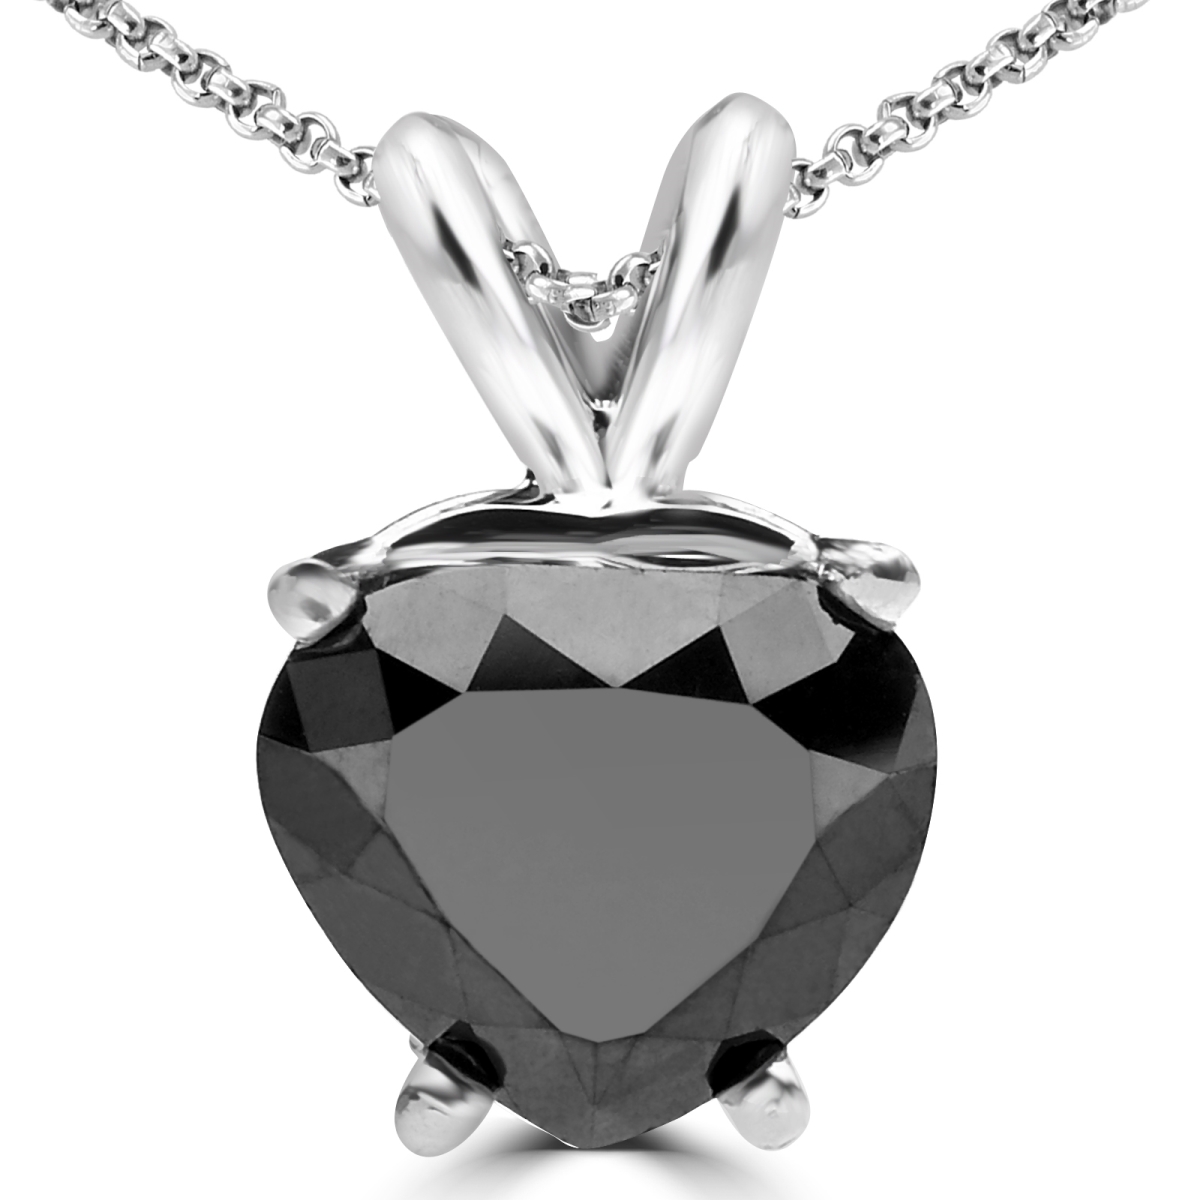 Md170123 1.25 Ct Heart Black Diamond Soltaire Pendant Necklace In 14k